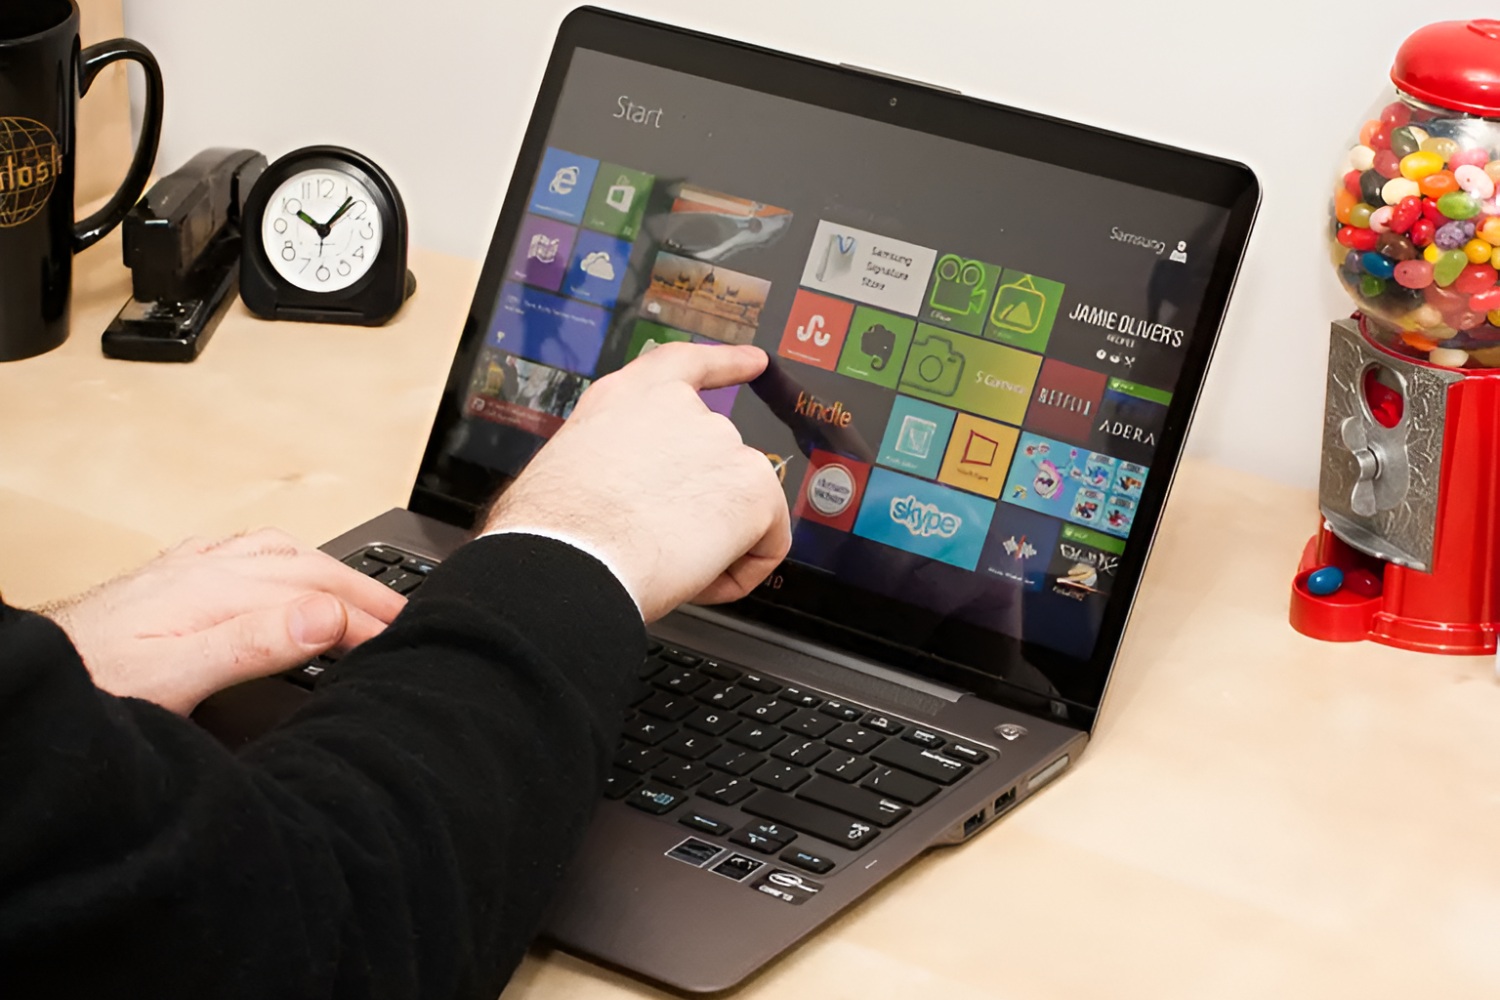 How To Install Windows 8 On Samsung Series 5 Ultrabook